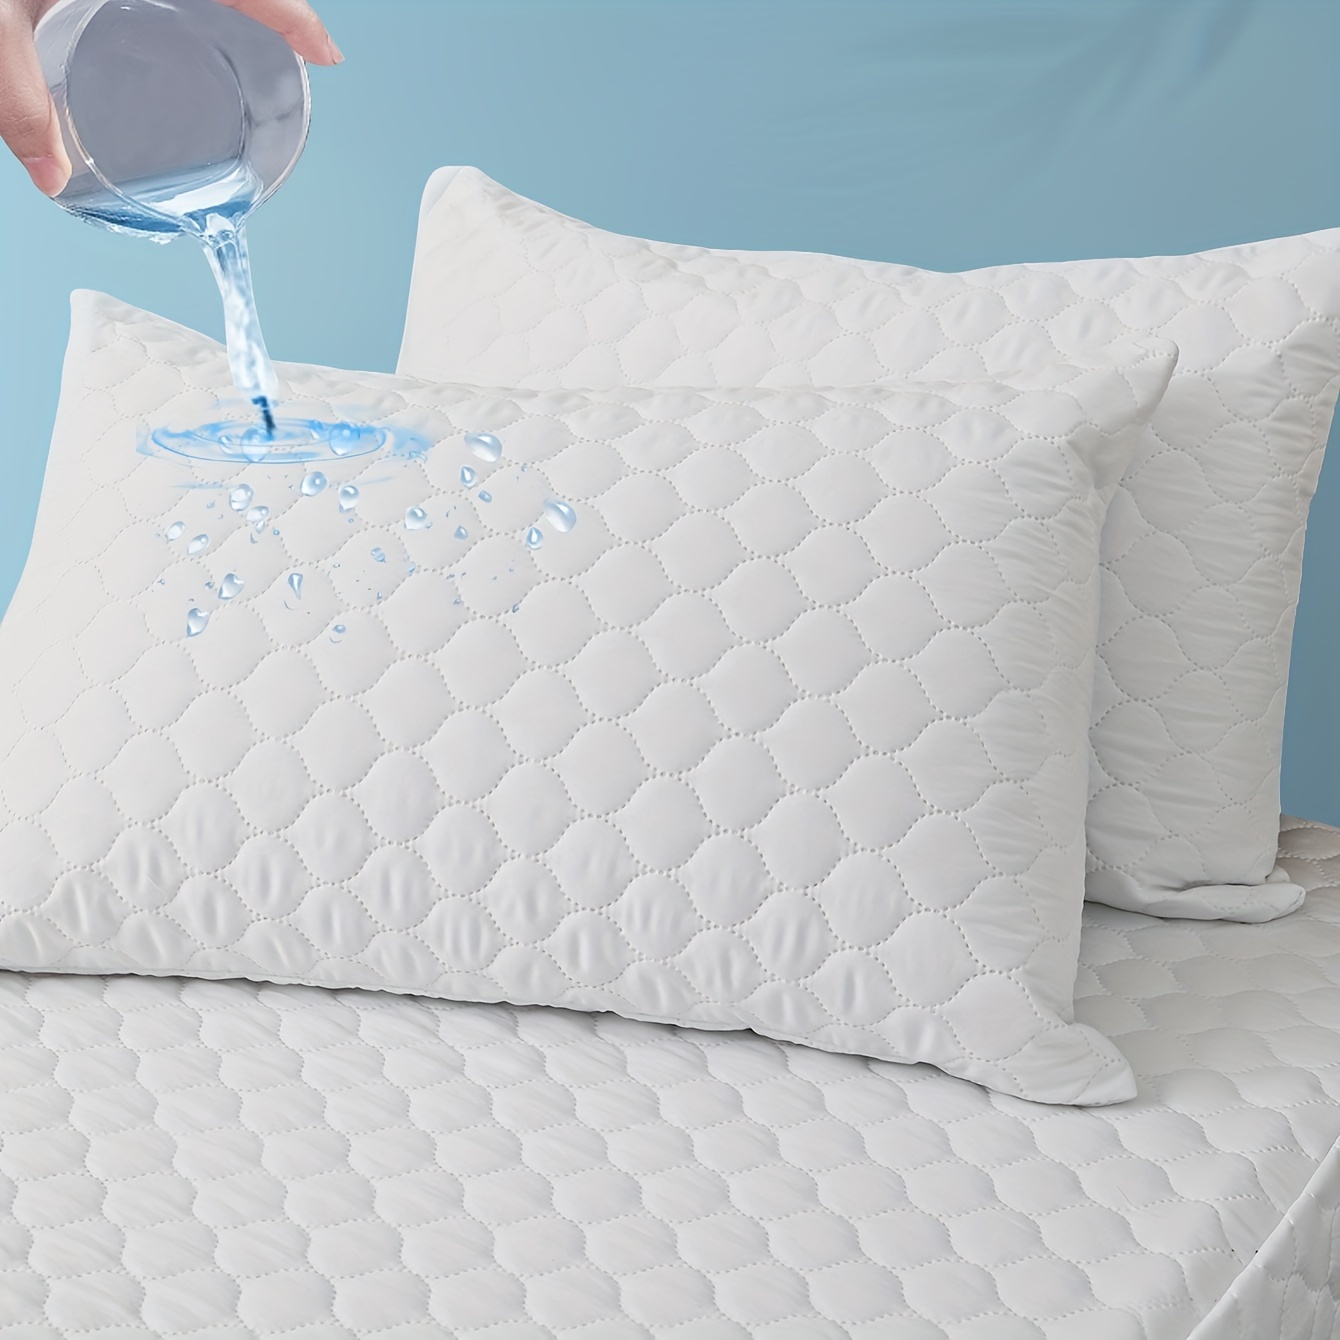 

2pcs Waterproof Cushion Cover Pillowcase (without Pillowcase) - For Pillows - Outer Cover Made Of Breathable With Tpu Treatment, 100 Microfibre Pillow Cover, Hypoallergenic Zip Pillow Protectors